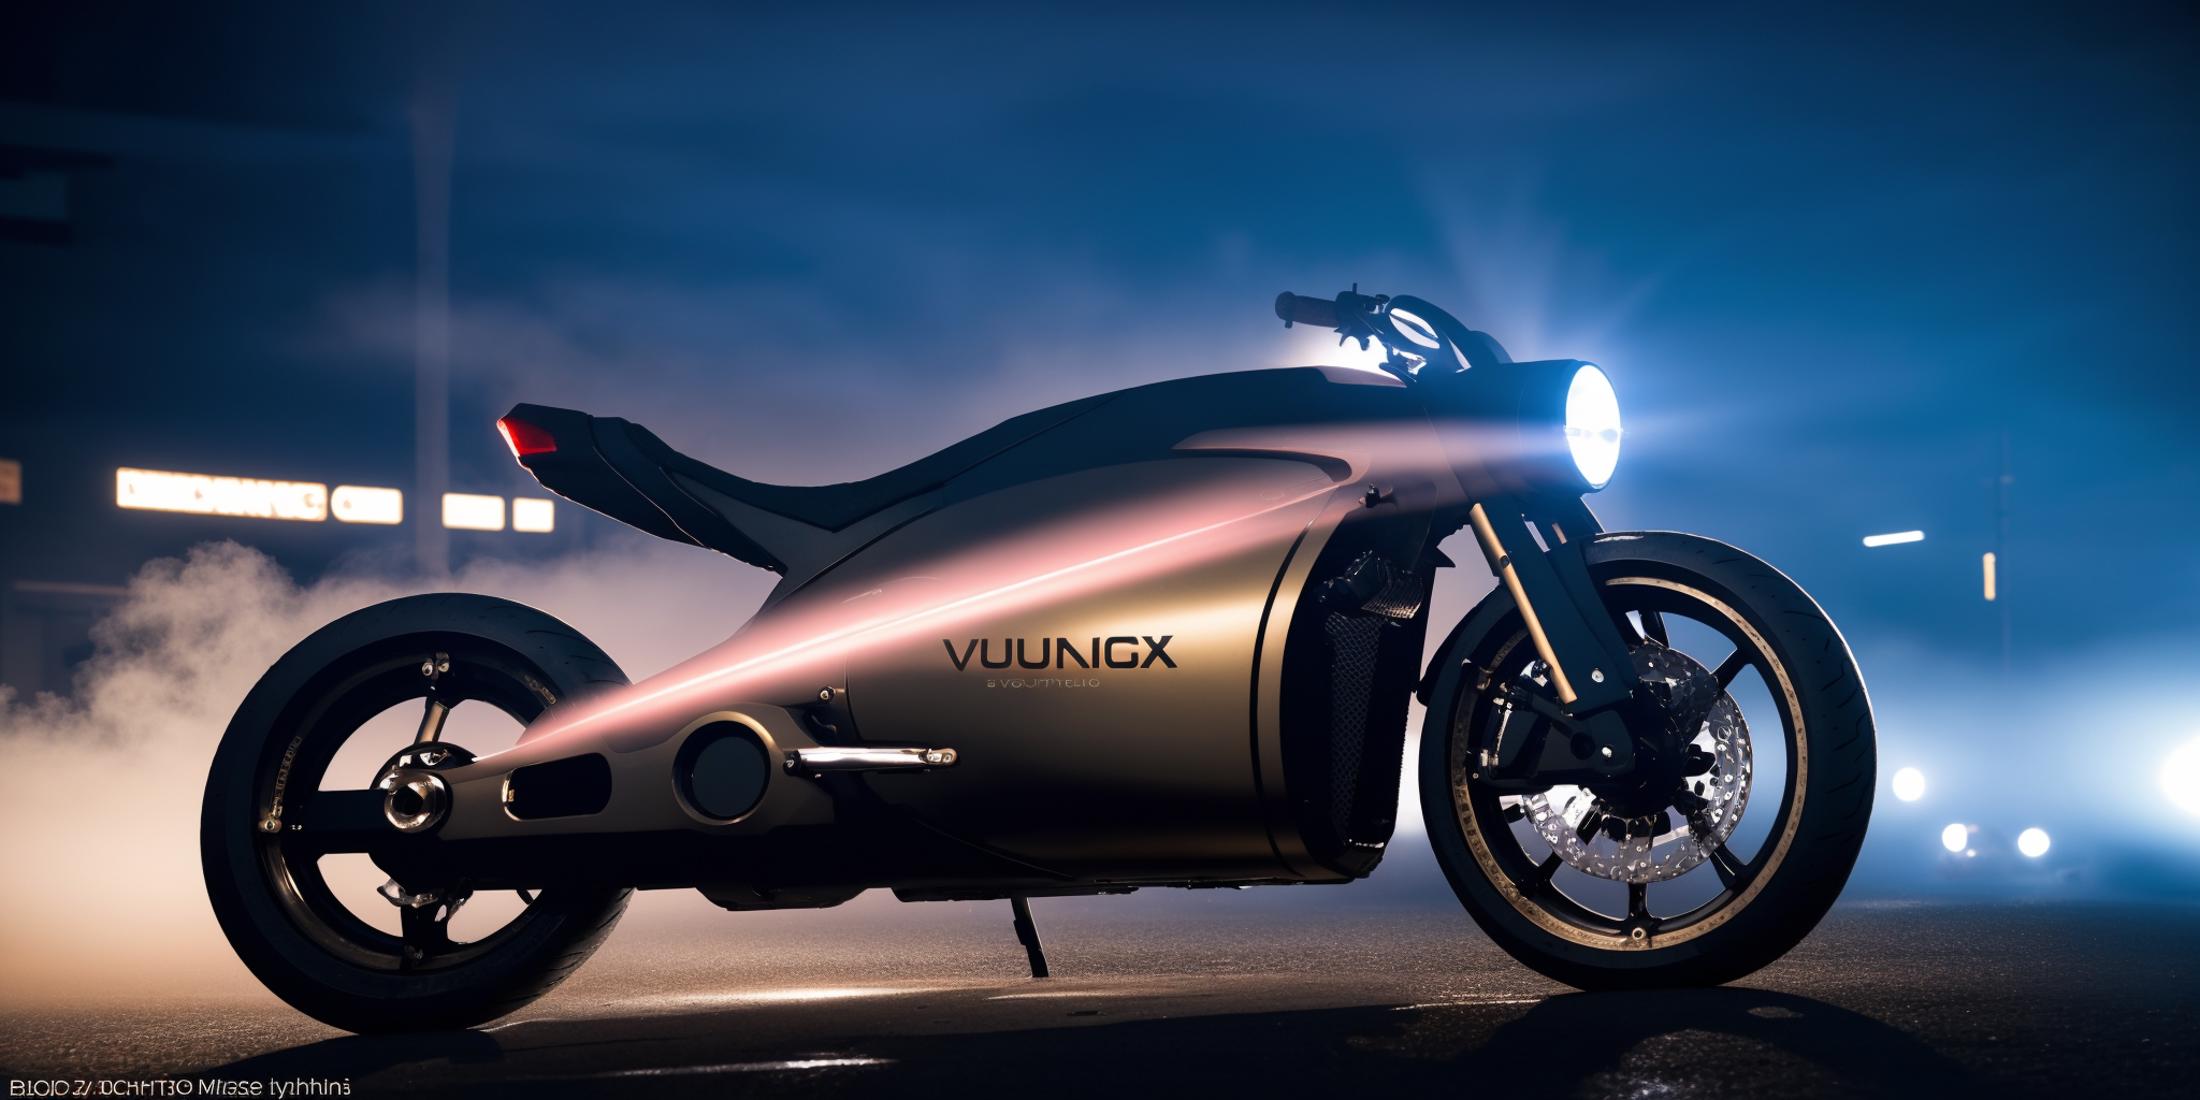 Sci-fi motorcycles image by Michelangelo